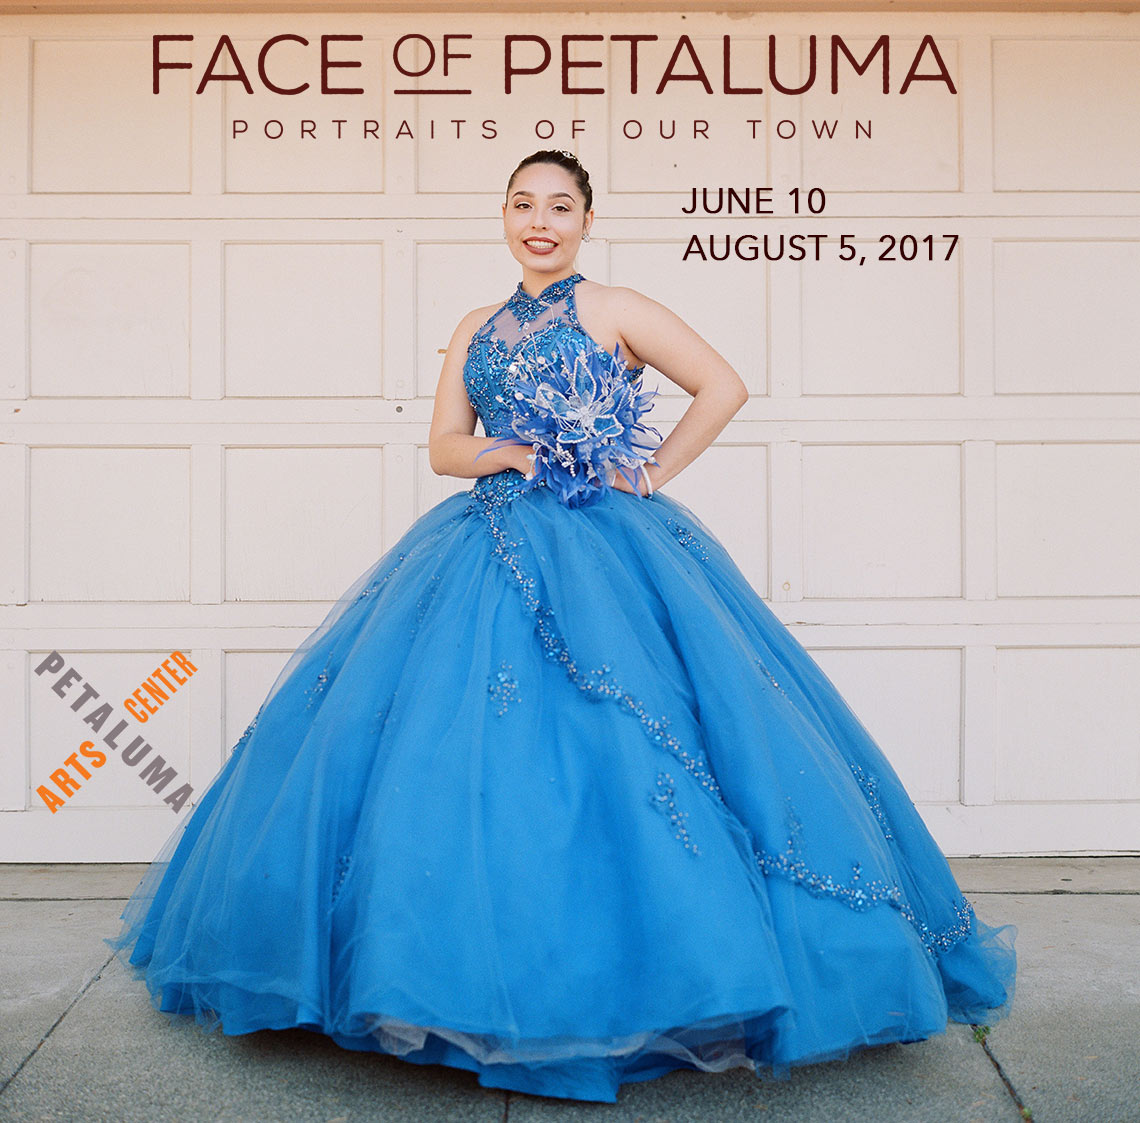 Photograph of a girl in a blue quinceañeara dress by Paige Green